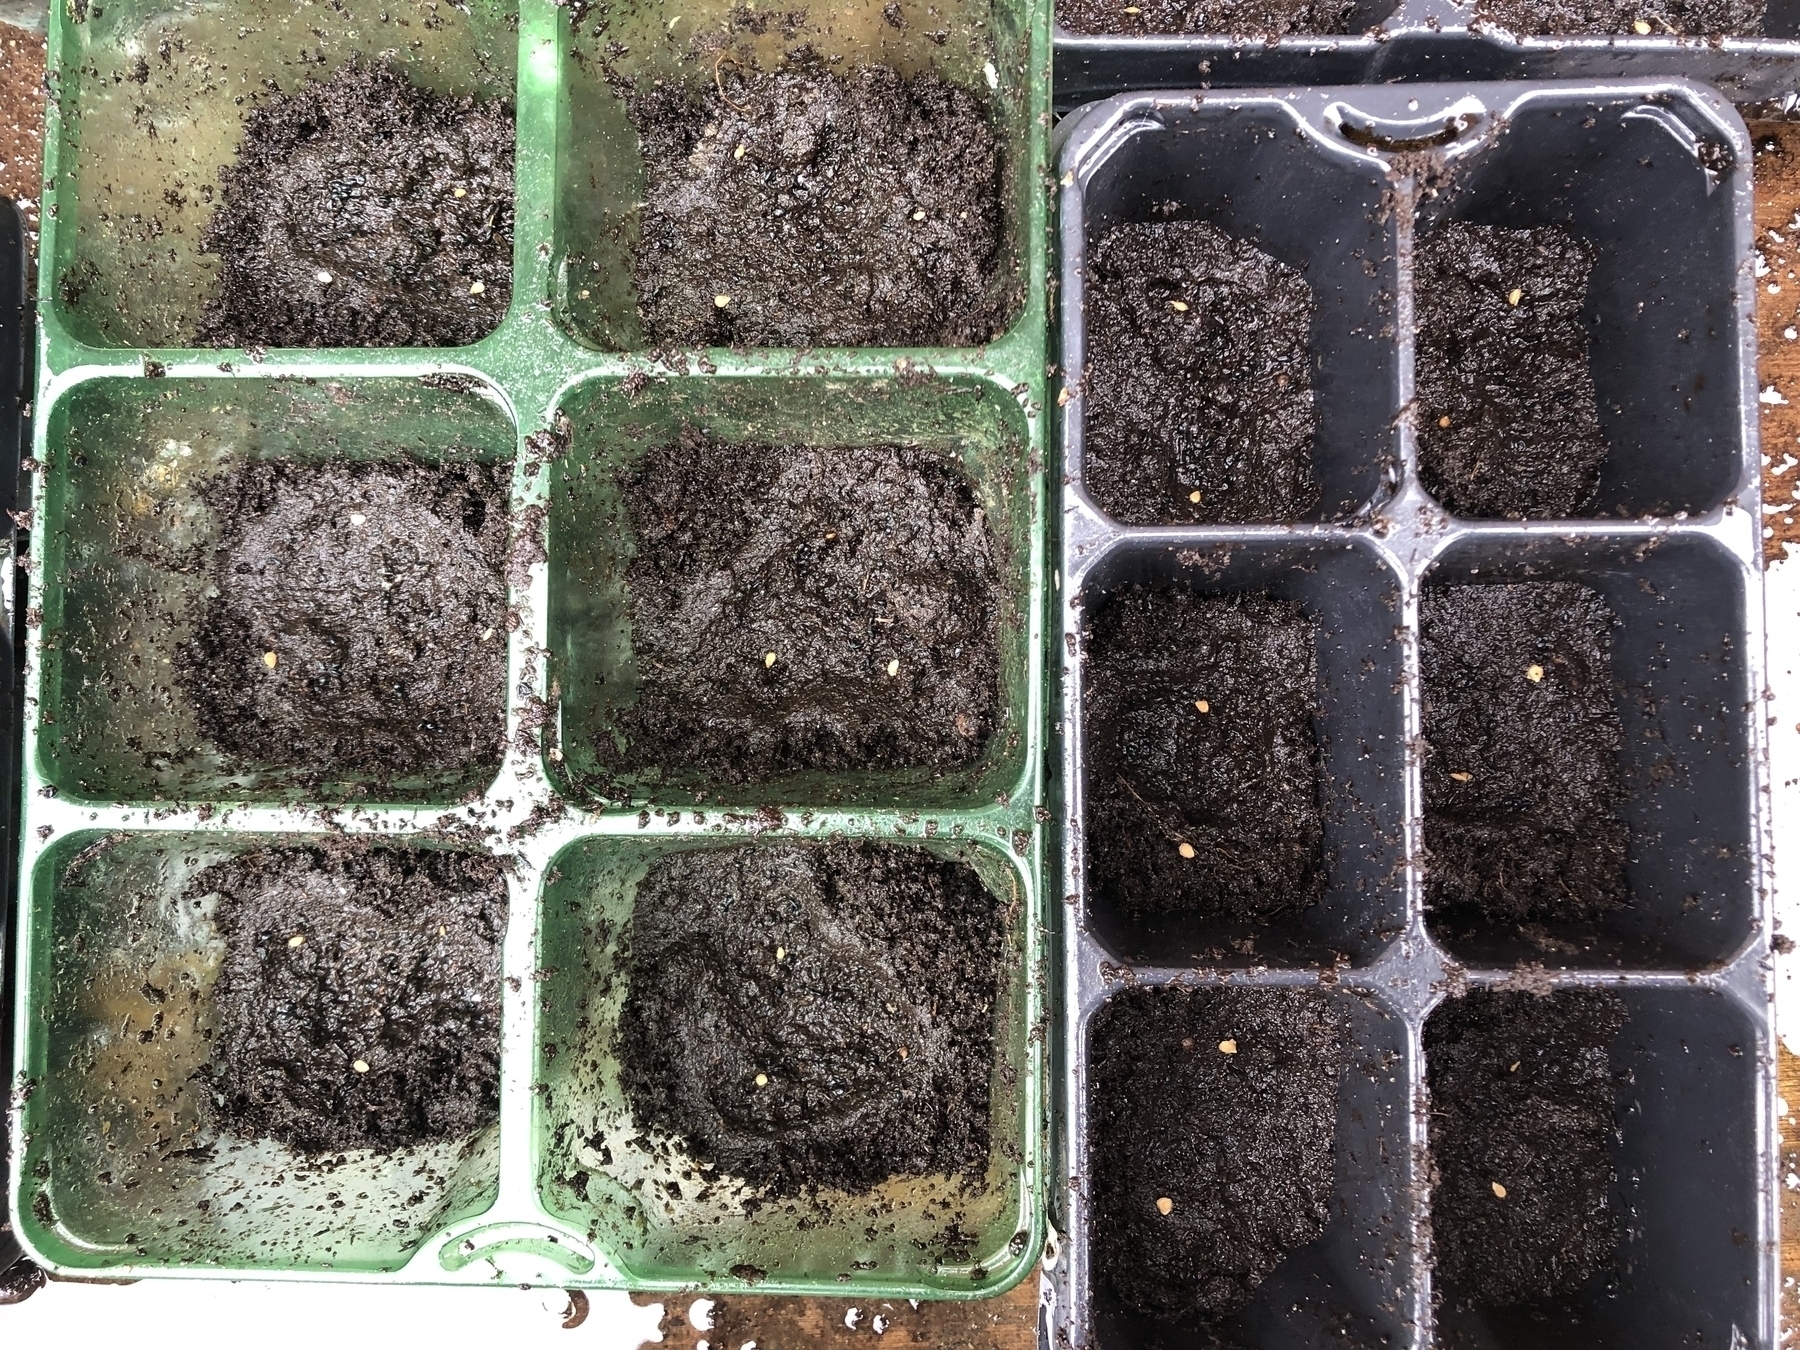 Trays of soil with tomato seeds in them